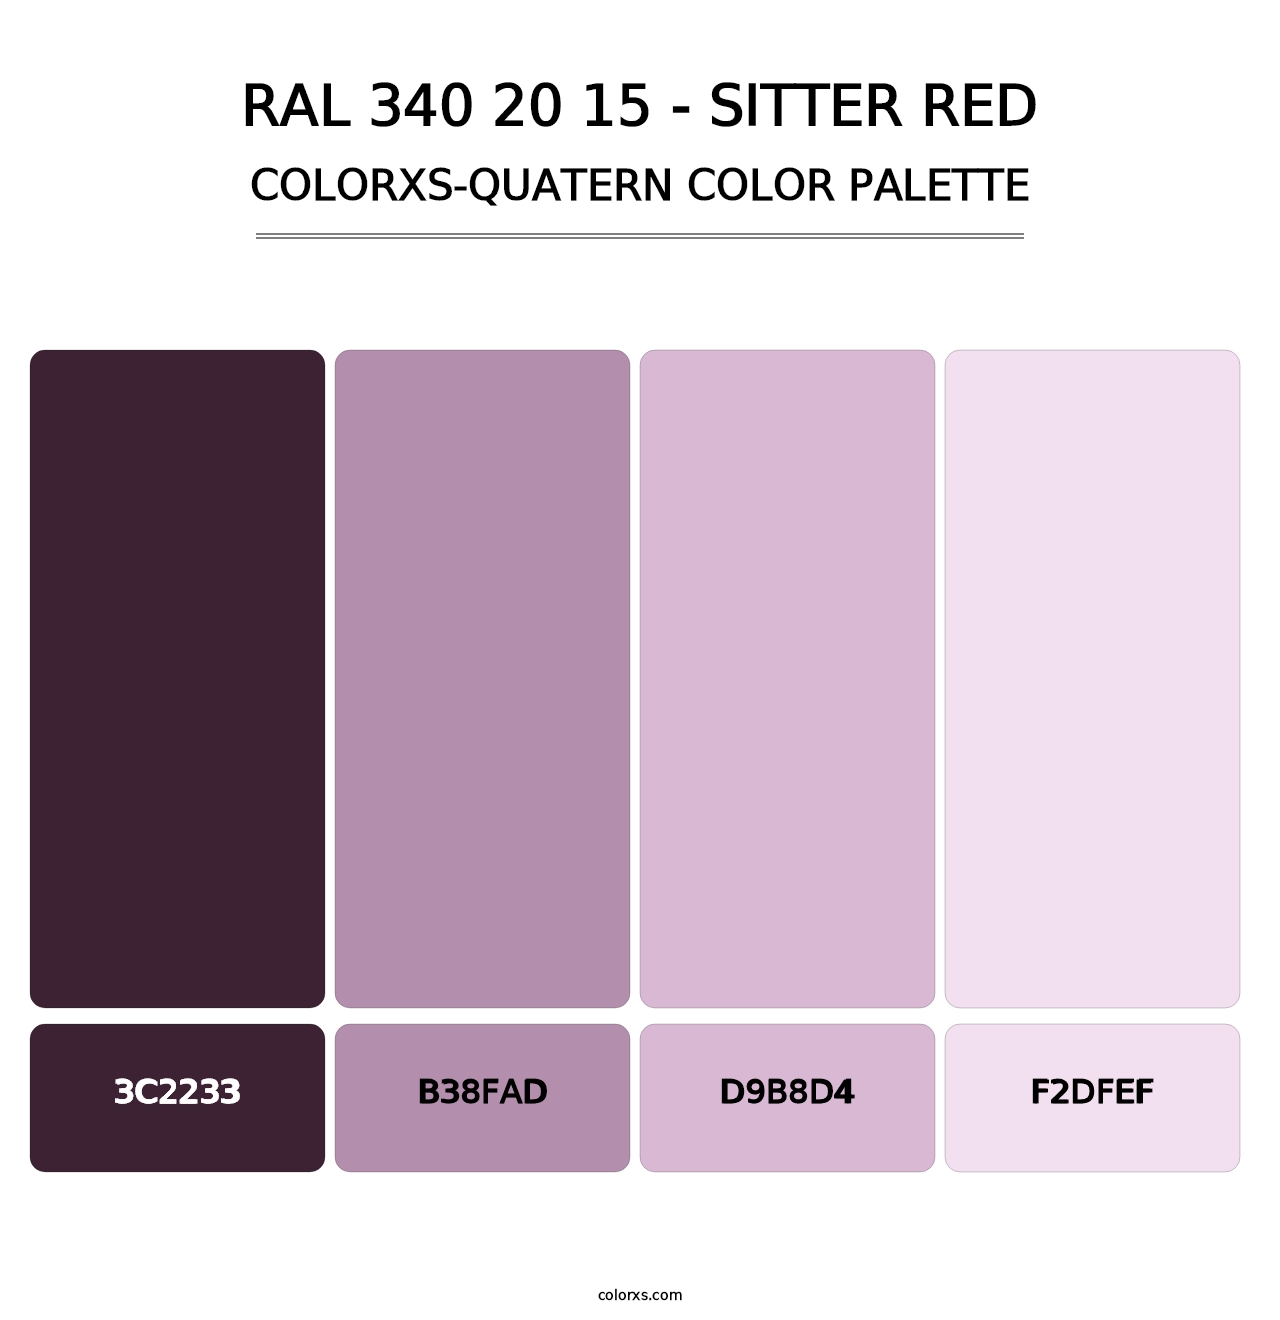 RAL 340 20 15 - Sitter Red - Colorxs Quatern Palette